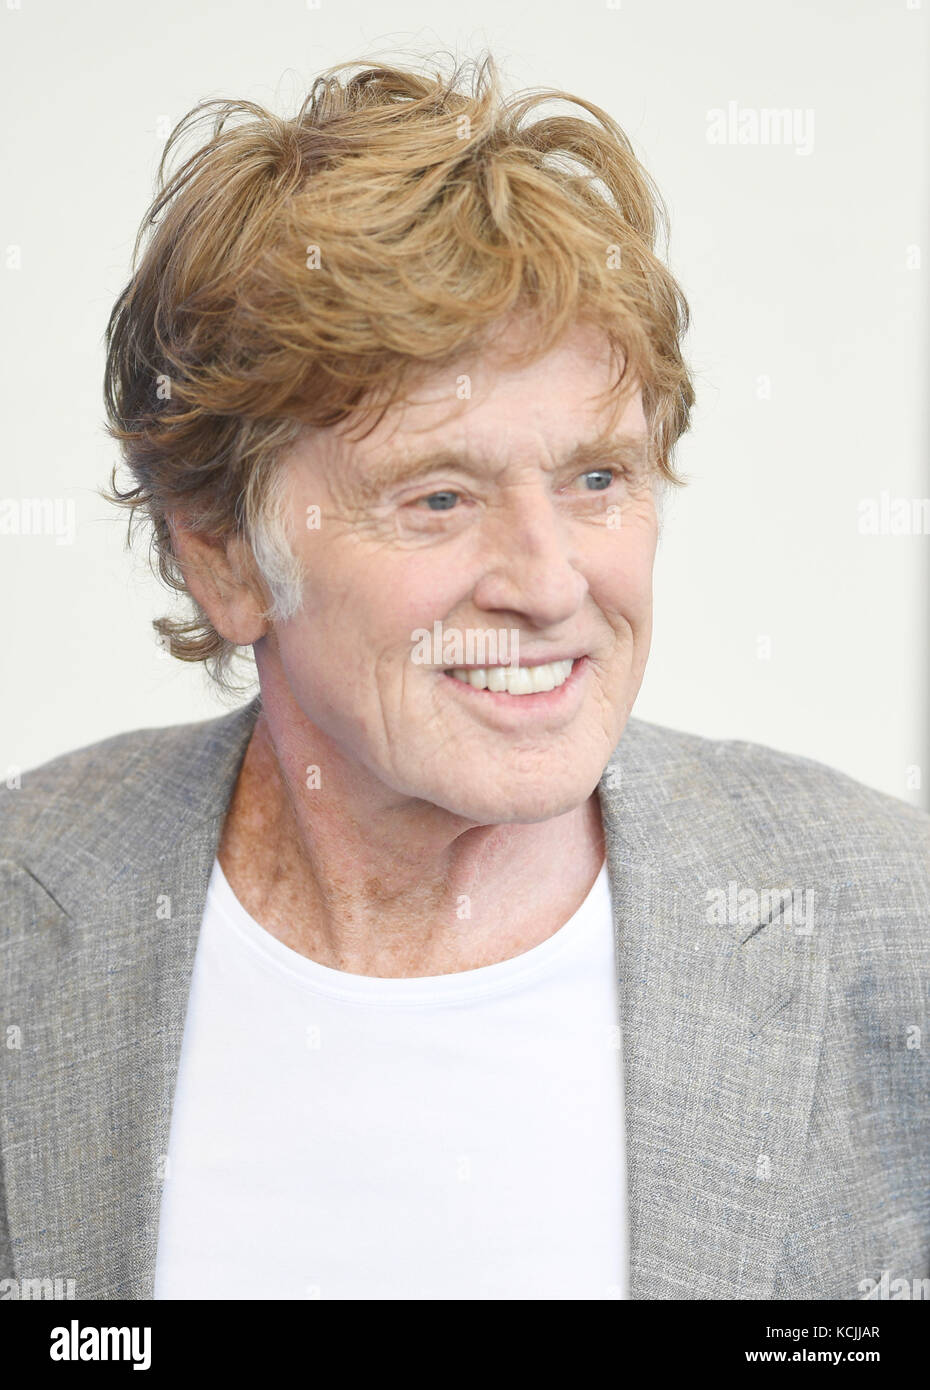 74th Venice Film Festival - 'Our Souls At Night' -  Photocall  Featuring: Robert Redford Where: Venice, Italy When: 01 Sep 2017 Credit: WENN.com Stock Photo